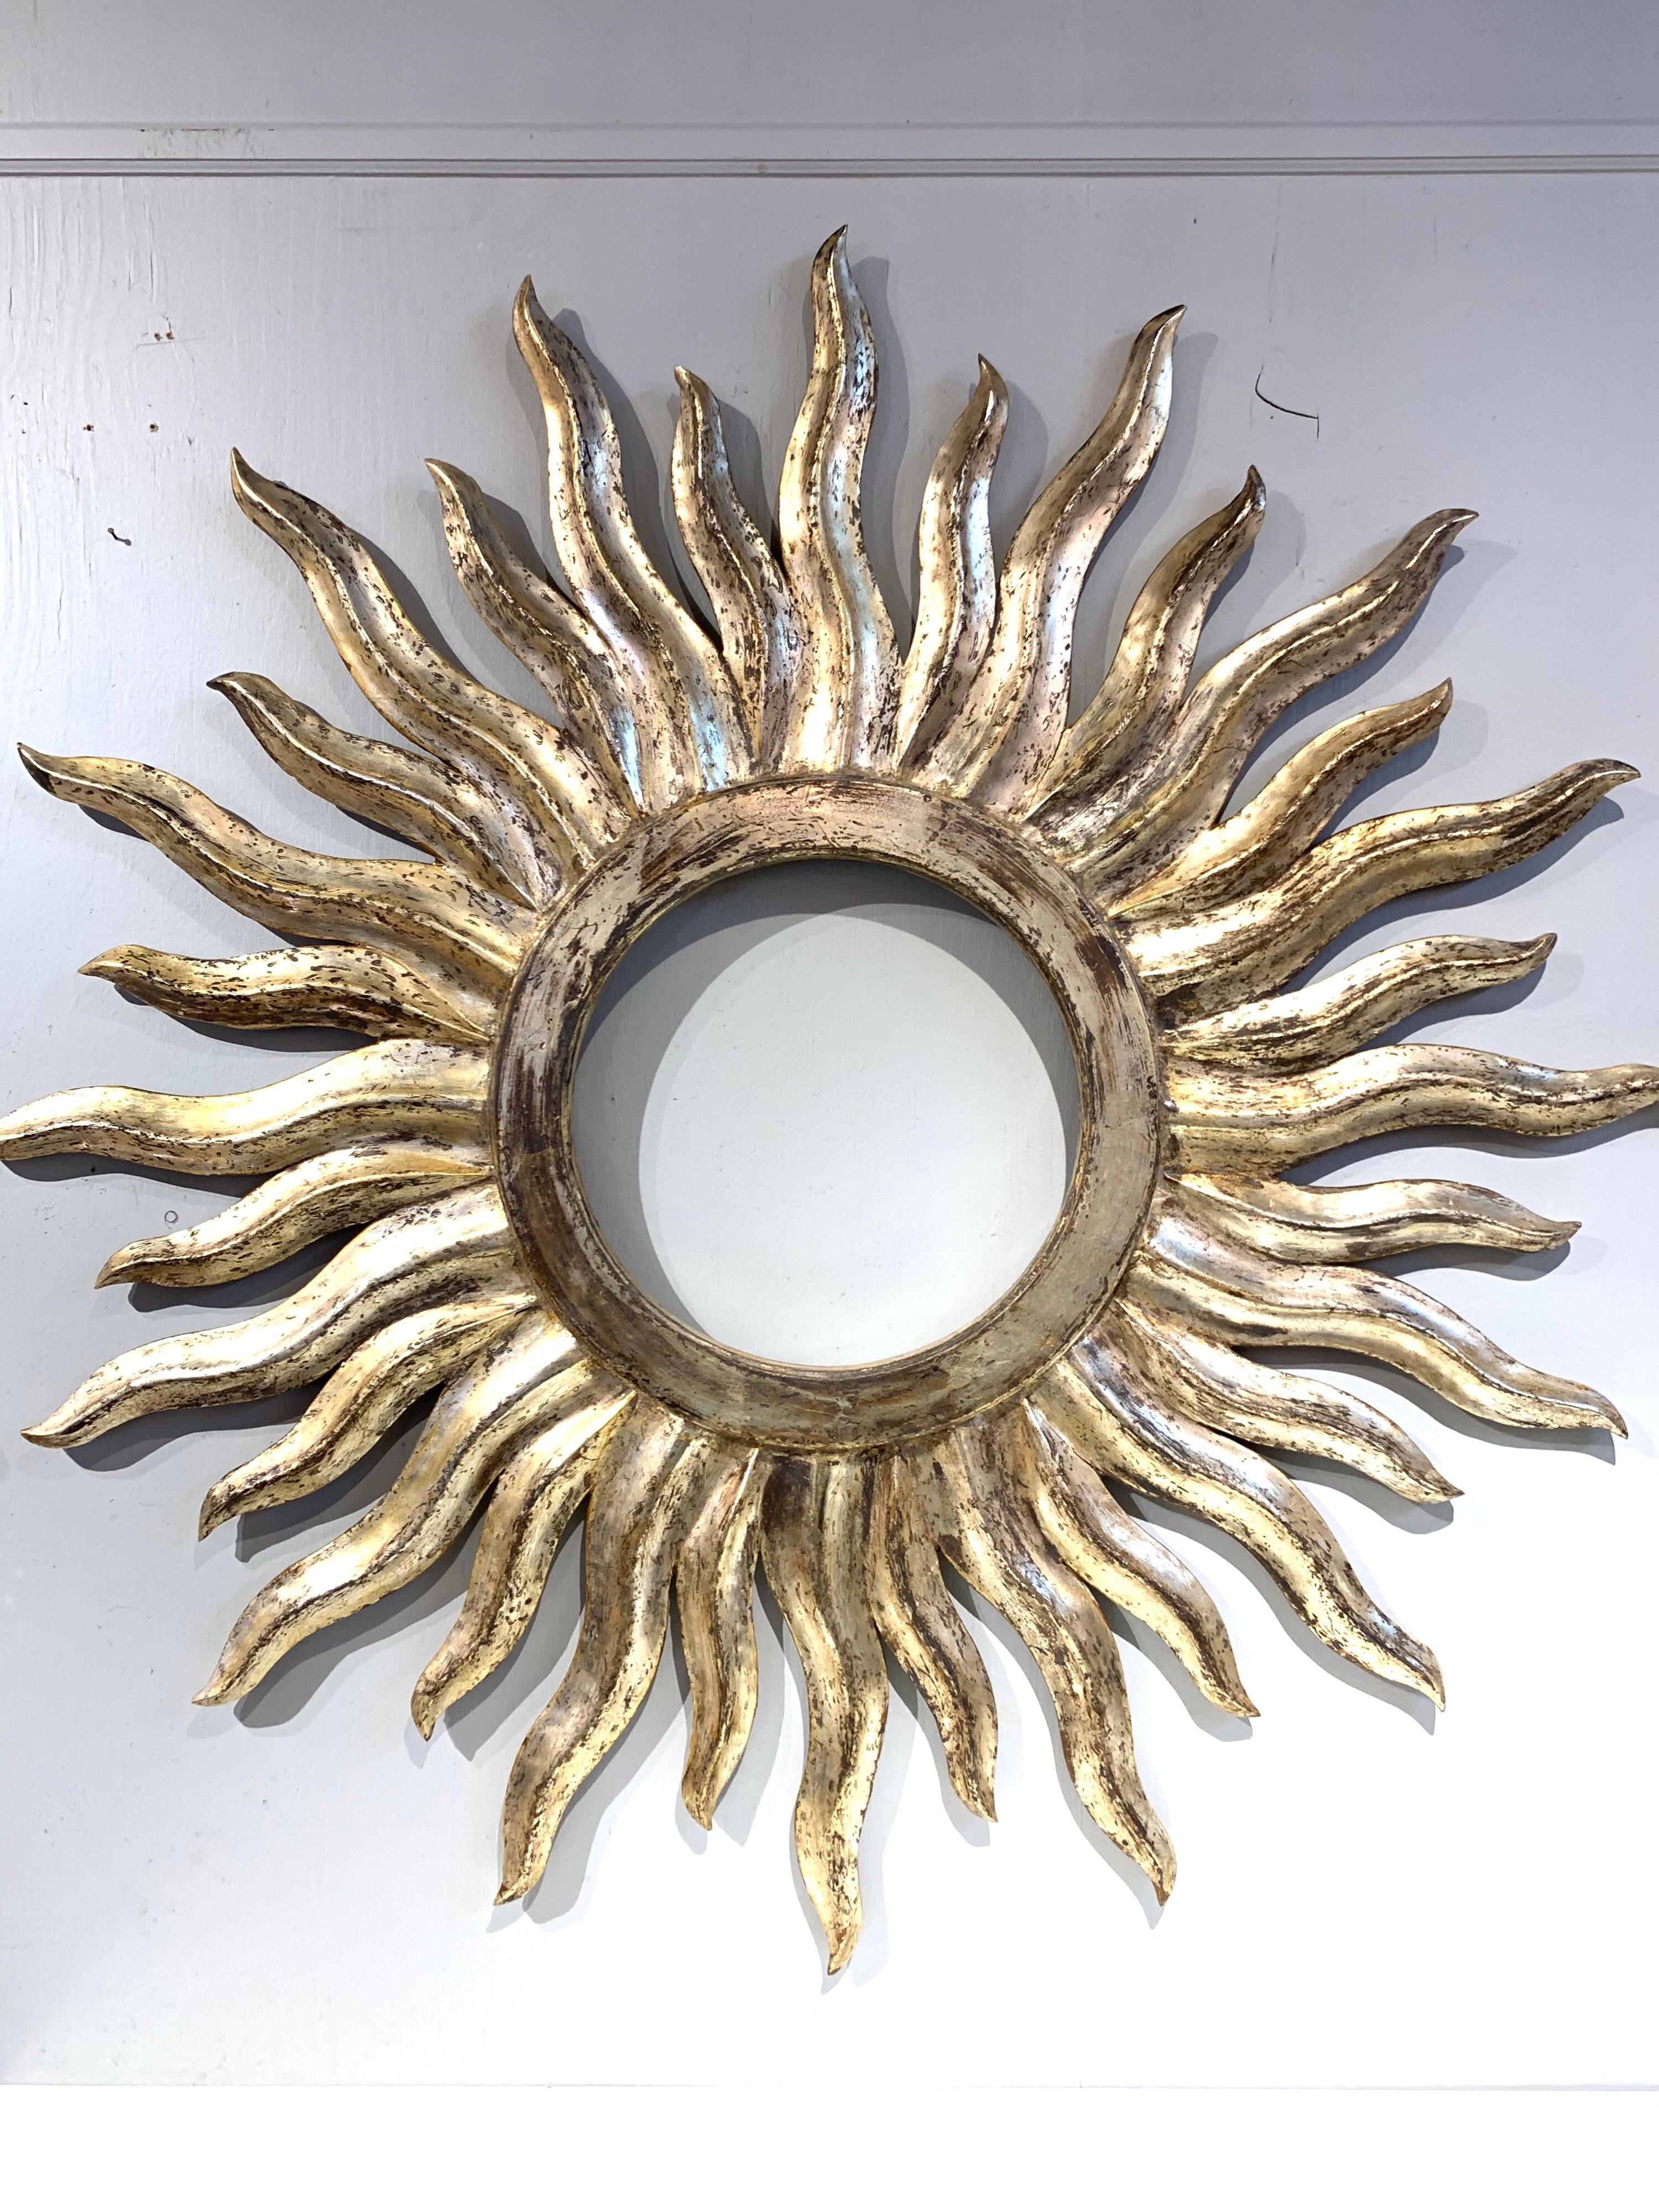 Incredible large scale decorative giltwood sunbursts. Carving is exceptional and so is the gilt finish. These make a very impressive statement. So beautiful!
Note: Priced per item.